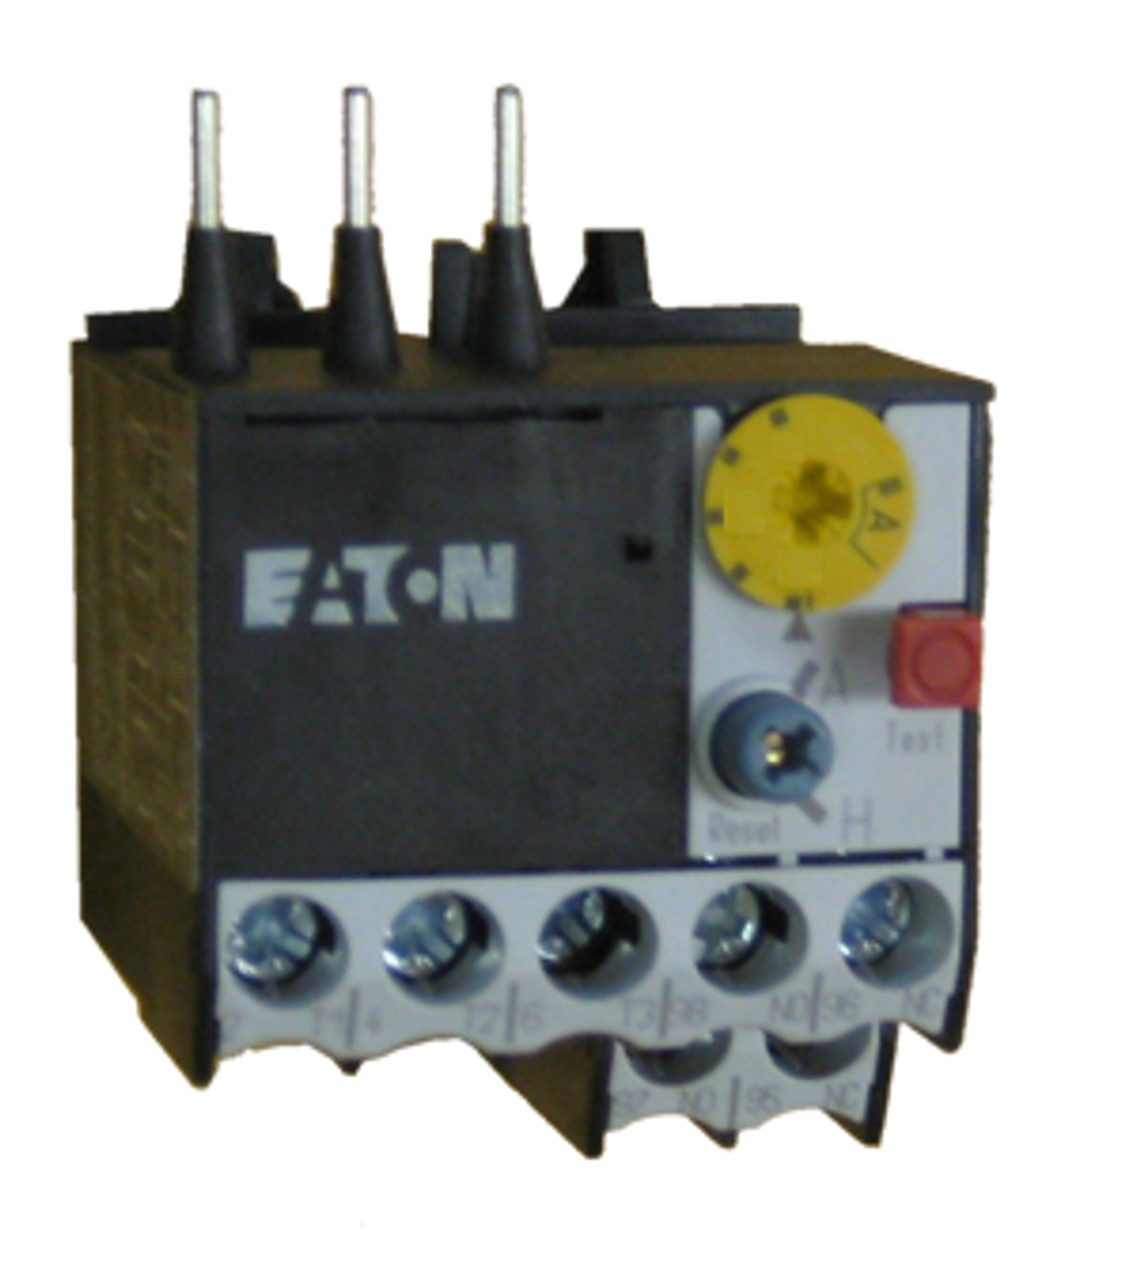 Eaton XTOM001AC1 thermal overload